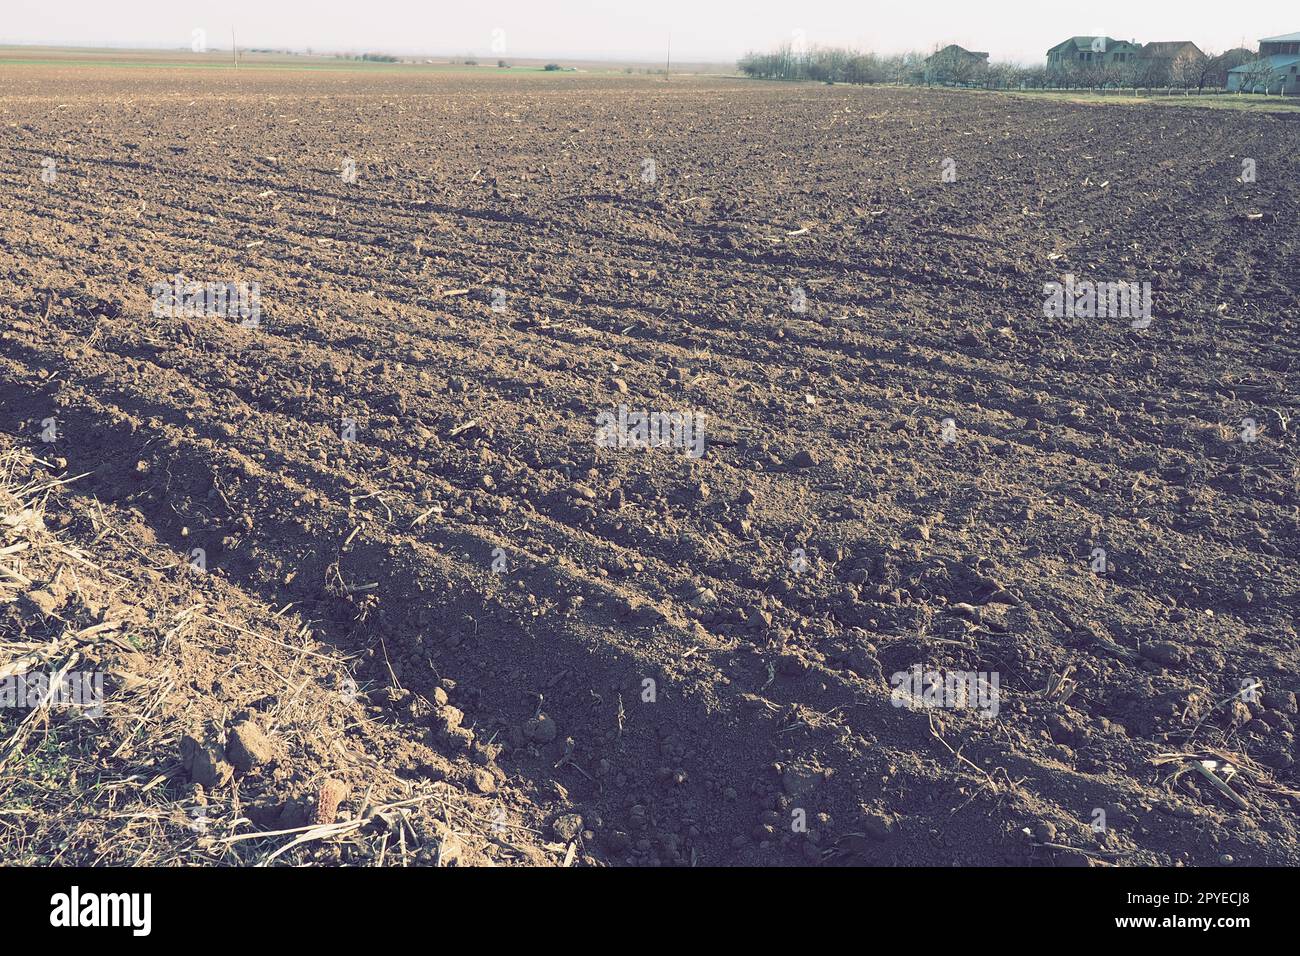 Arable field ready for spring agricultural work. Furrows from the passage of a tractor or combine. Cornmeal on the ground. Fertile soil for planting. Fertilizers are the key to a good harvest. Stock Photo